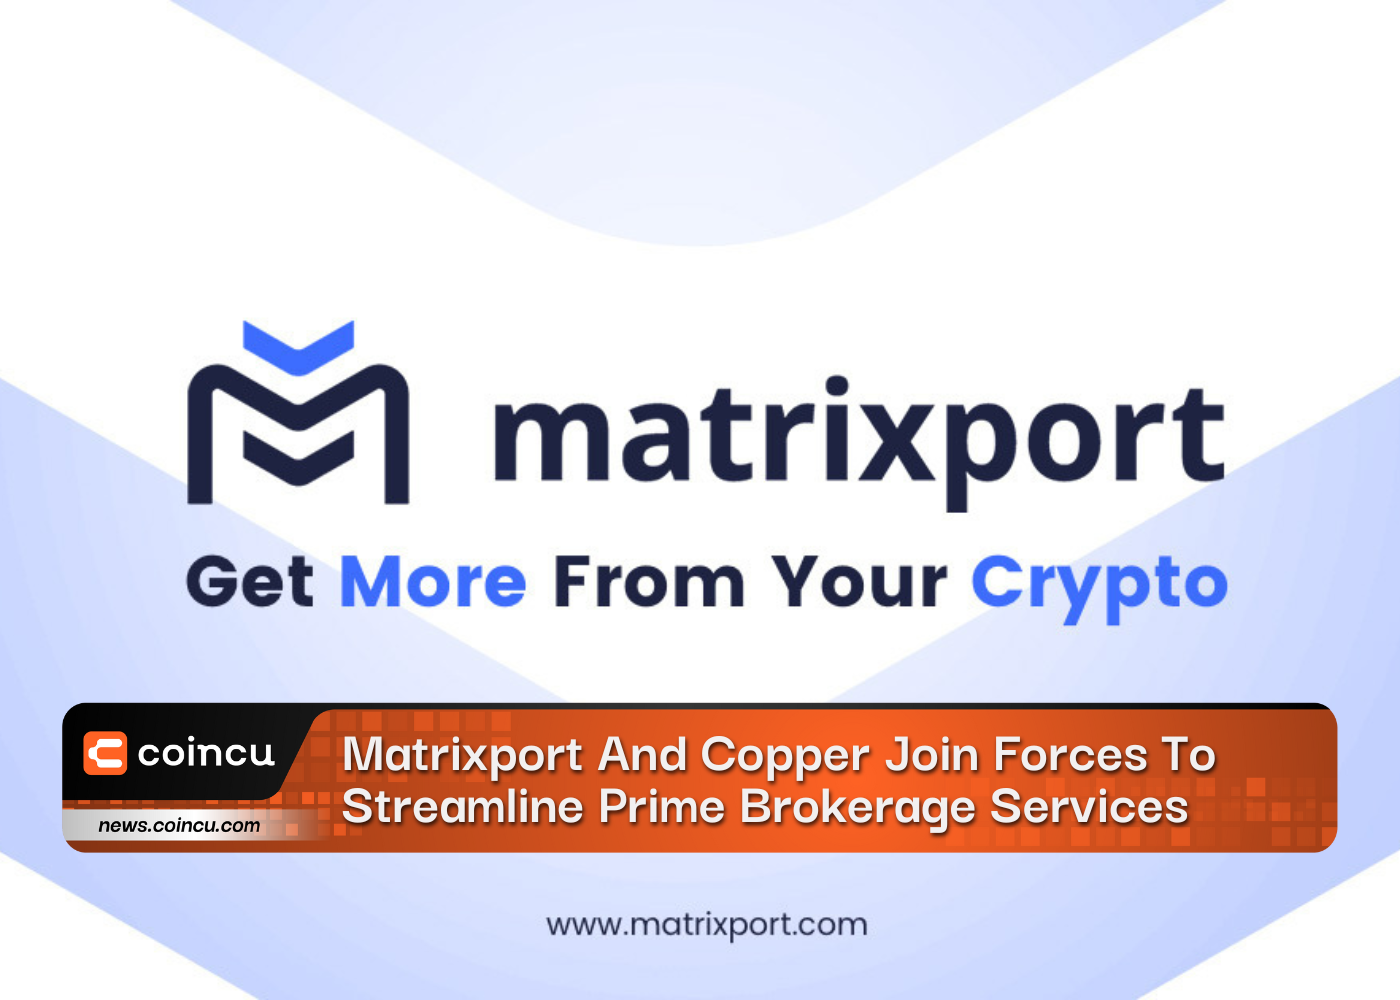 Matrixport And Copper Join Forces To